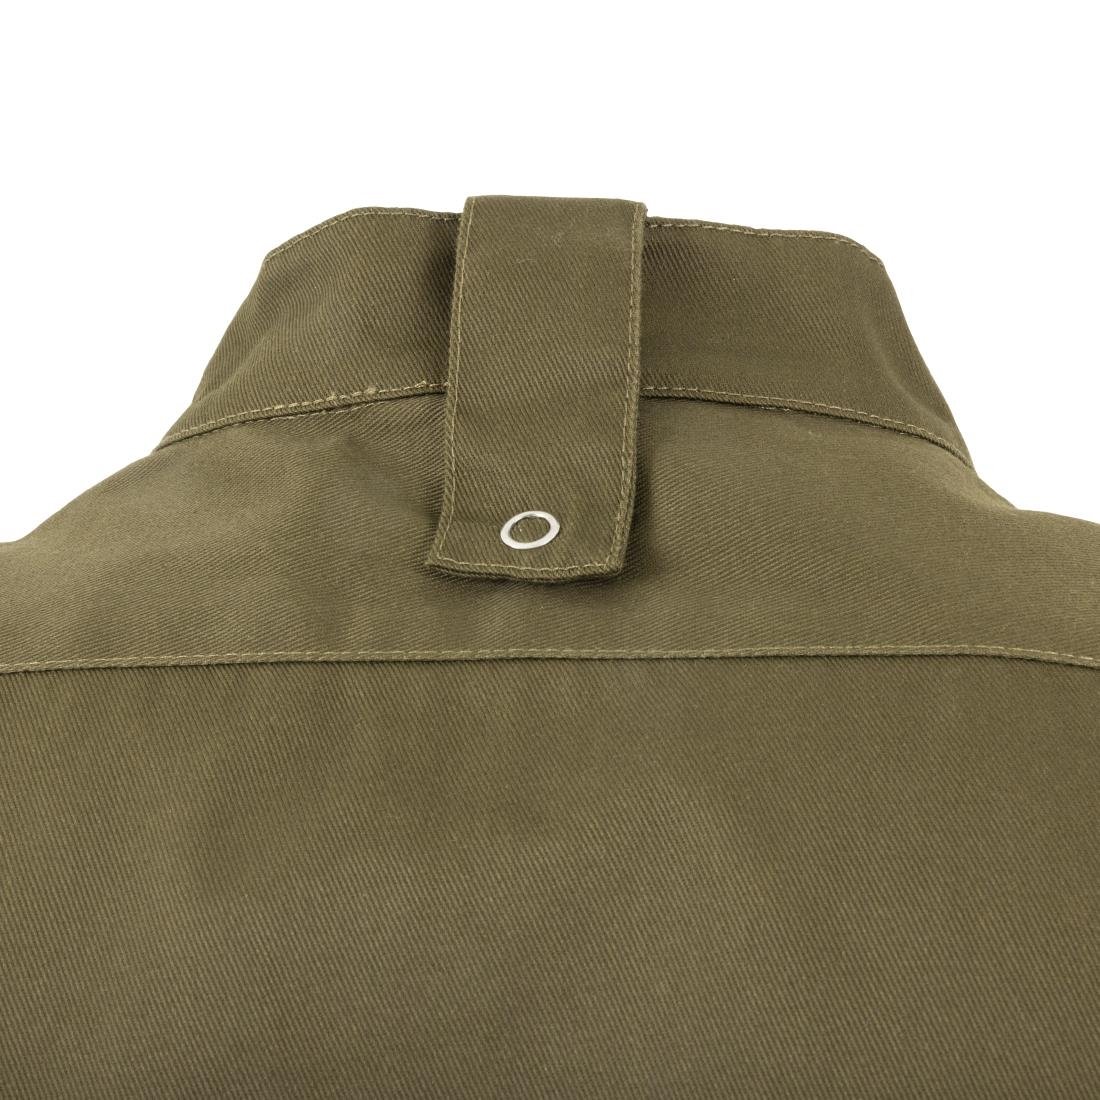 BA001-S Southside Band Collar Chef Jacket Khaki Size S JD Catering Equipment Solutions Ltd